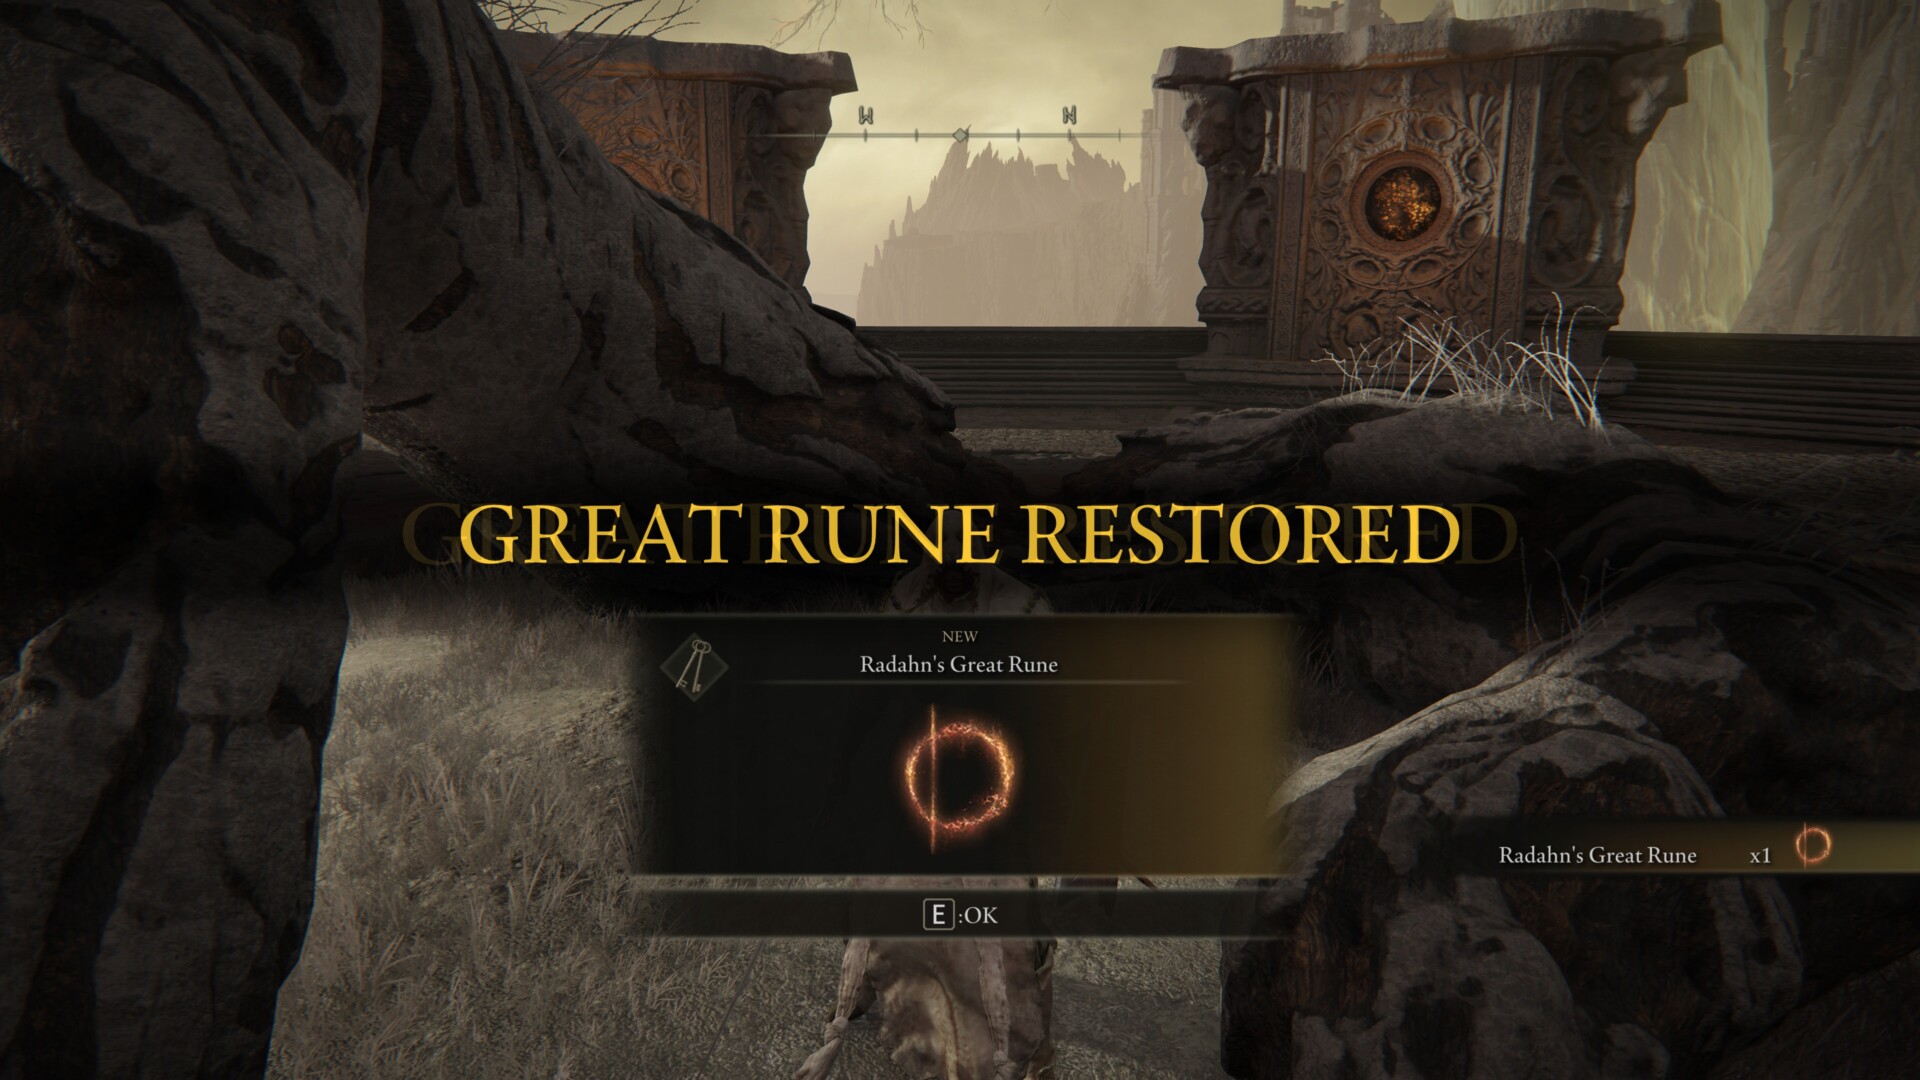 Elden Ring Divine Tower of Caelid and Radahn's Great Rune guide